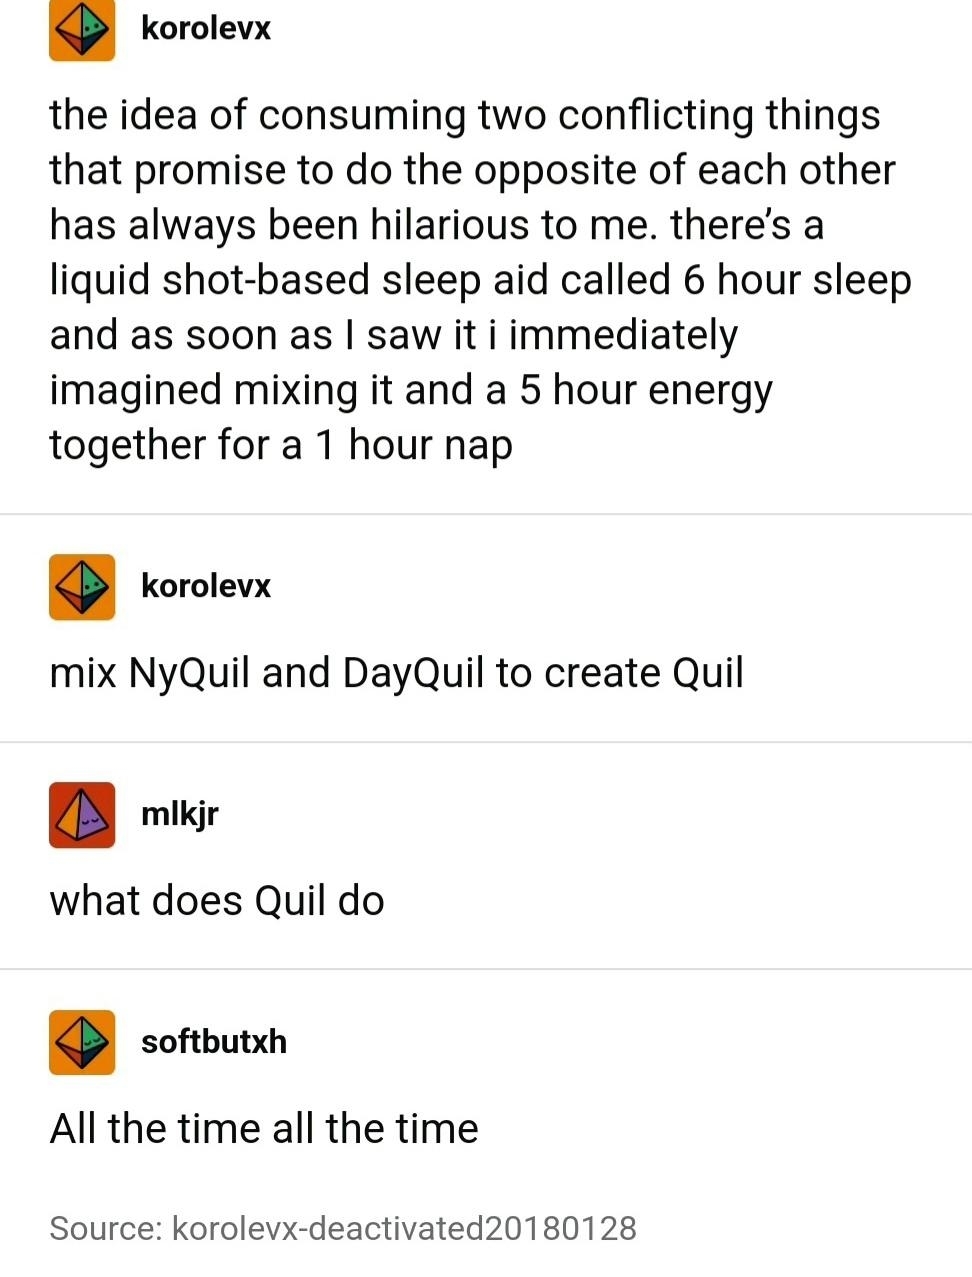 &quot;Consuming two things that promise to do the opposite of each other has always been hilarious; I imagined mixing a liquid shot-based sleep aid called 6-hour sleep and a 5-hour energy for a 1 hour nap&quot;; response: &quot;mix NyQuil and DayQuil to create Quil&quot;